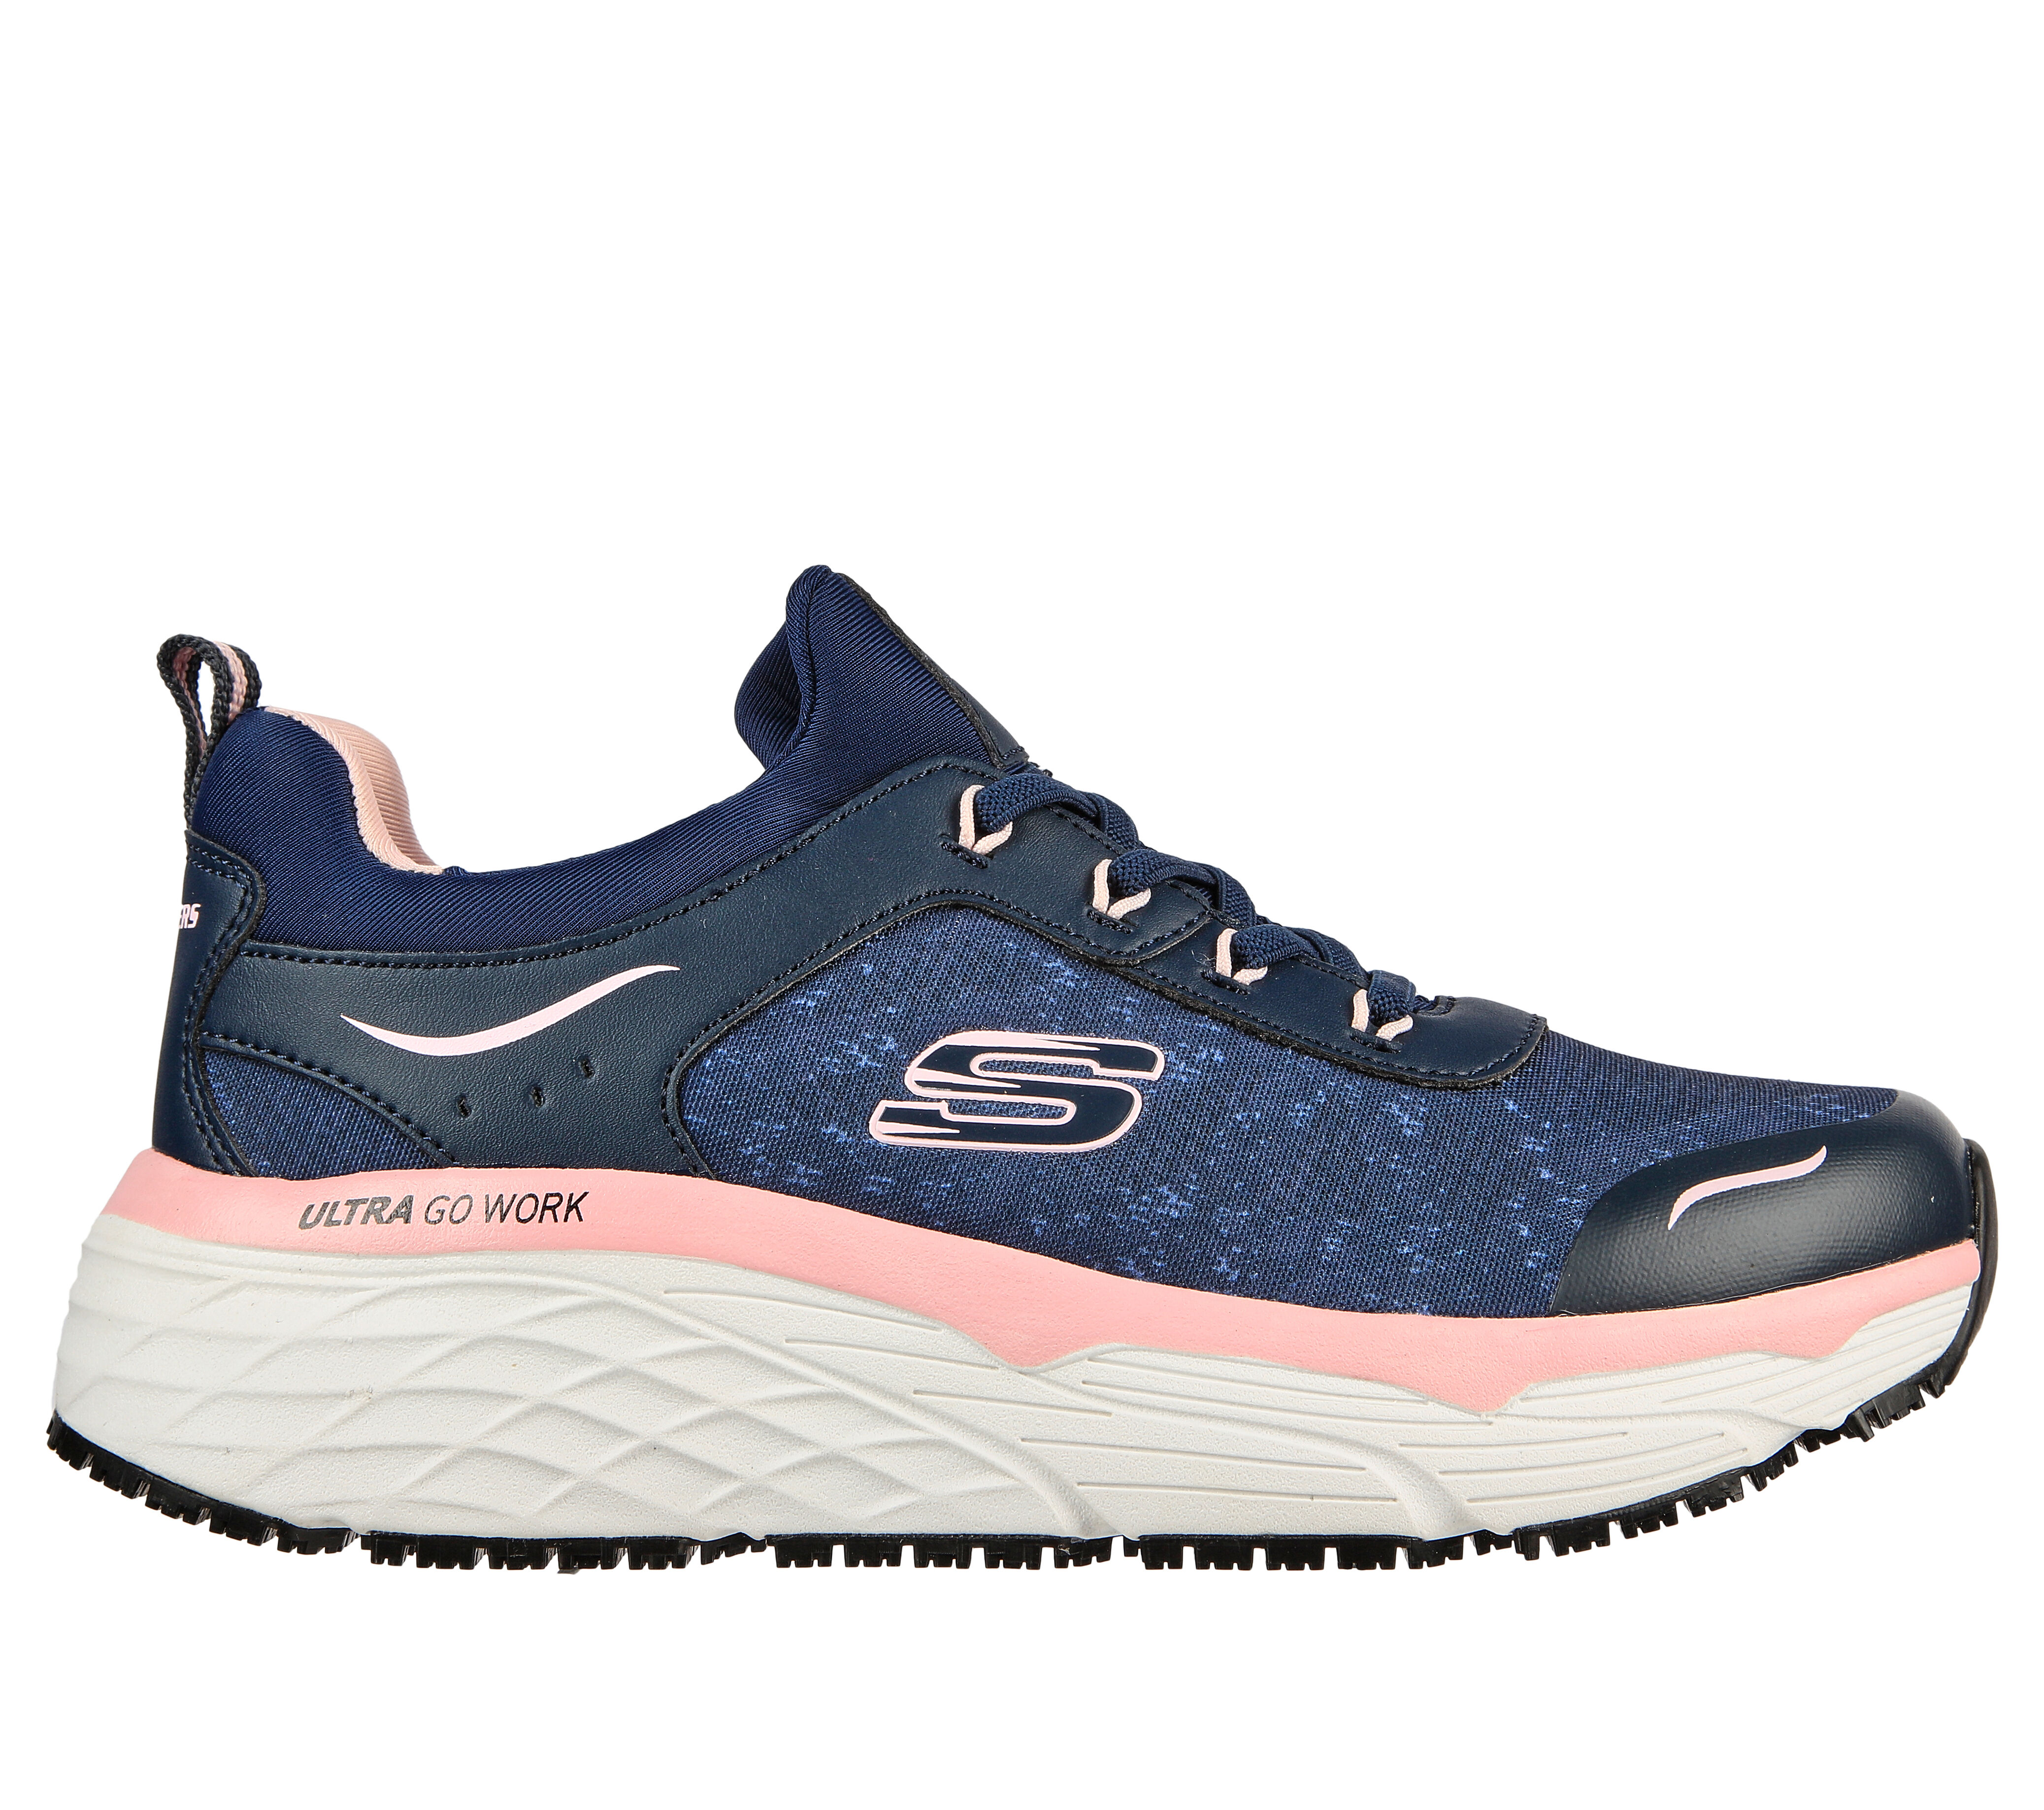 skechers safety shoes canada